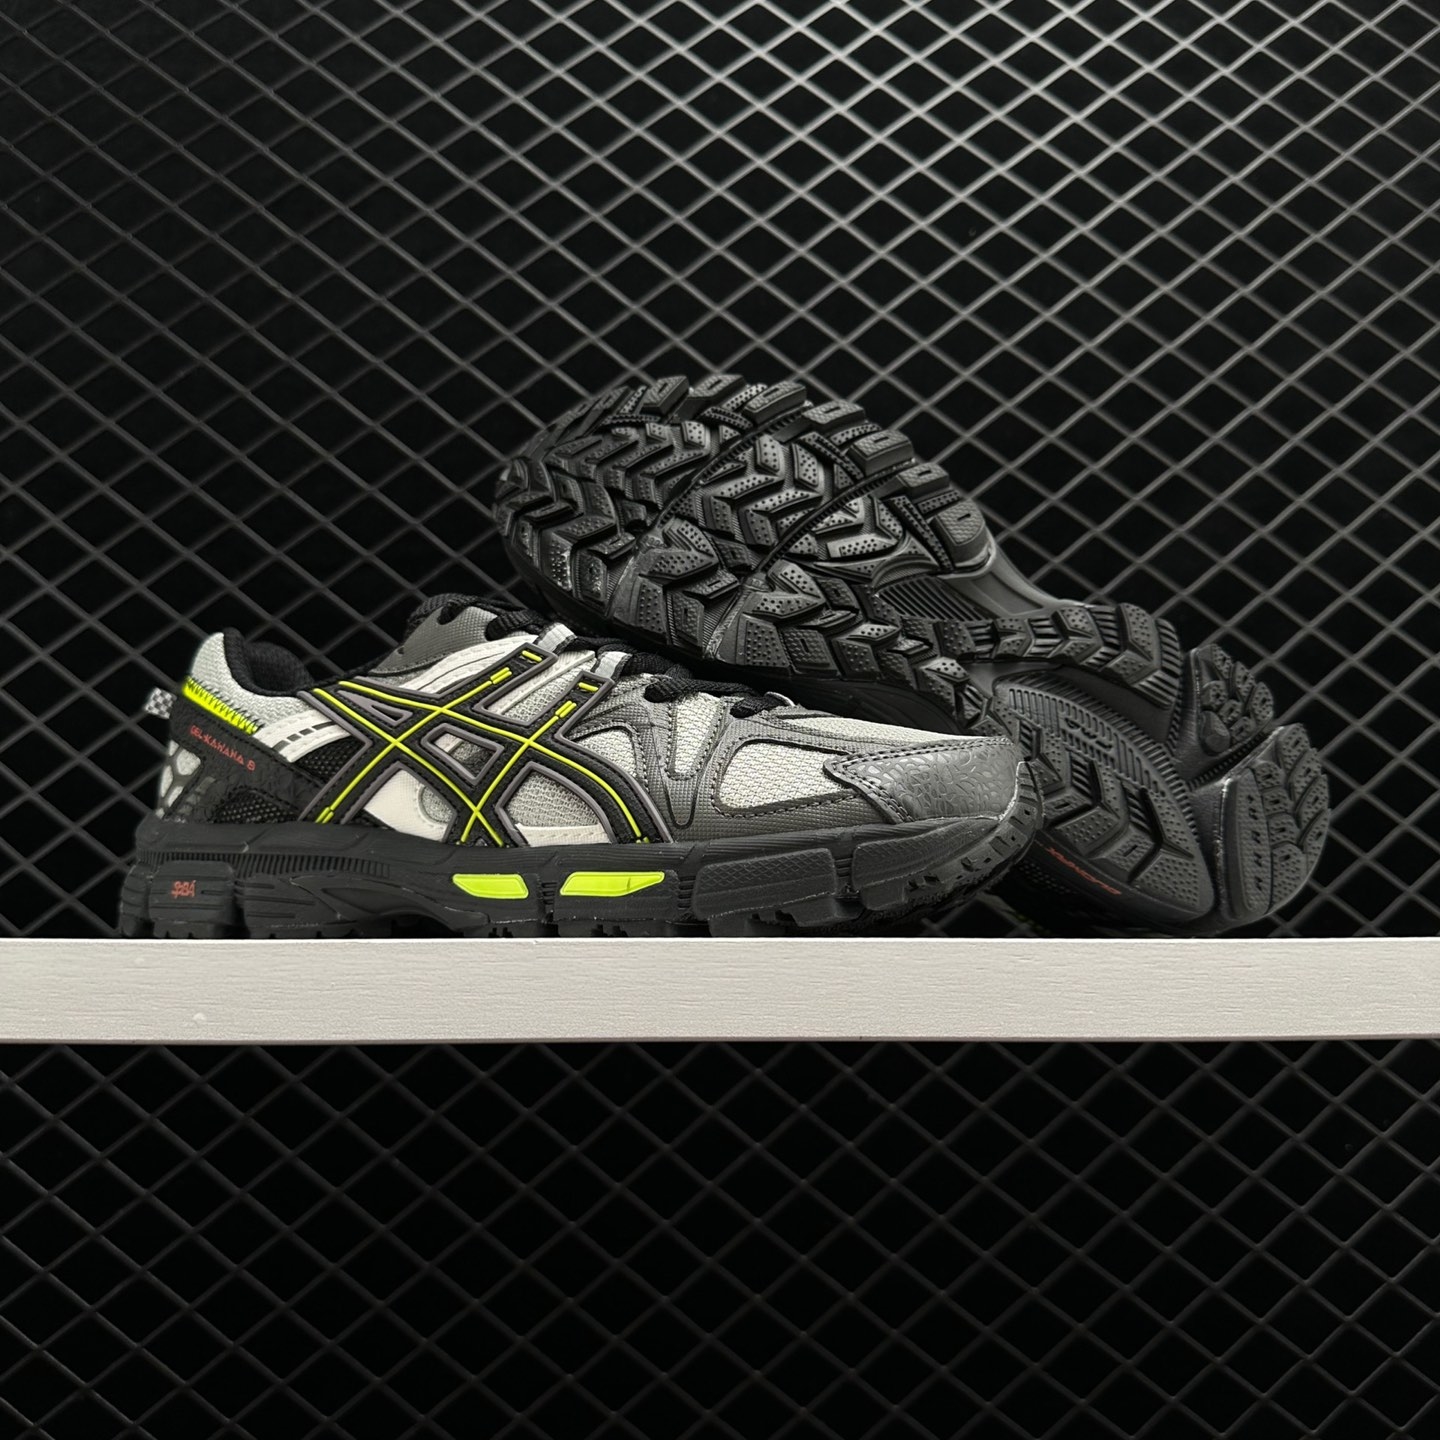 Shop the Stylish Asics Gel-Kahana 8 Grey Black 1011B109-026 for Ultimate Comfort and Performance at Great Prices!